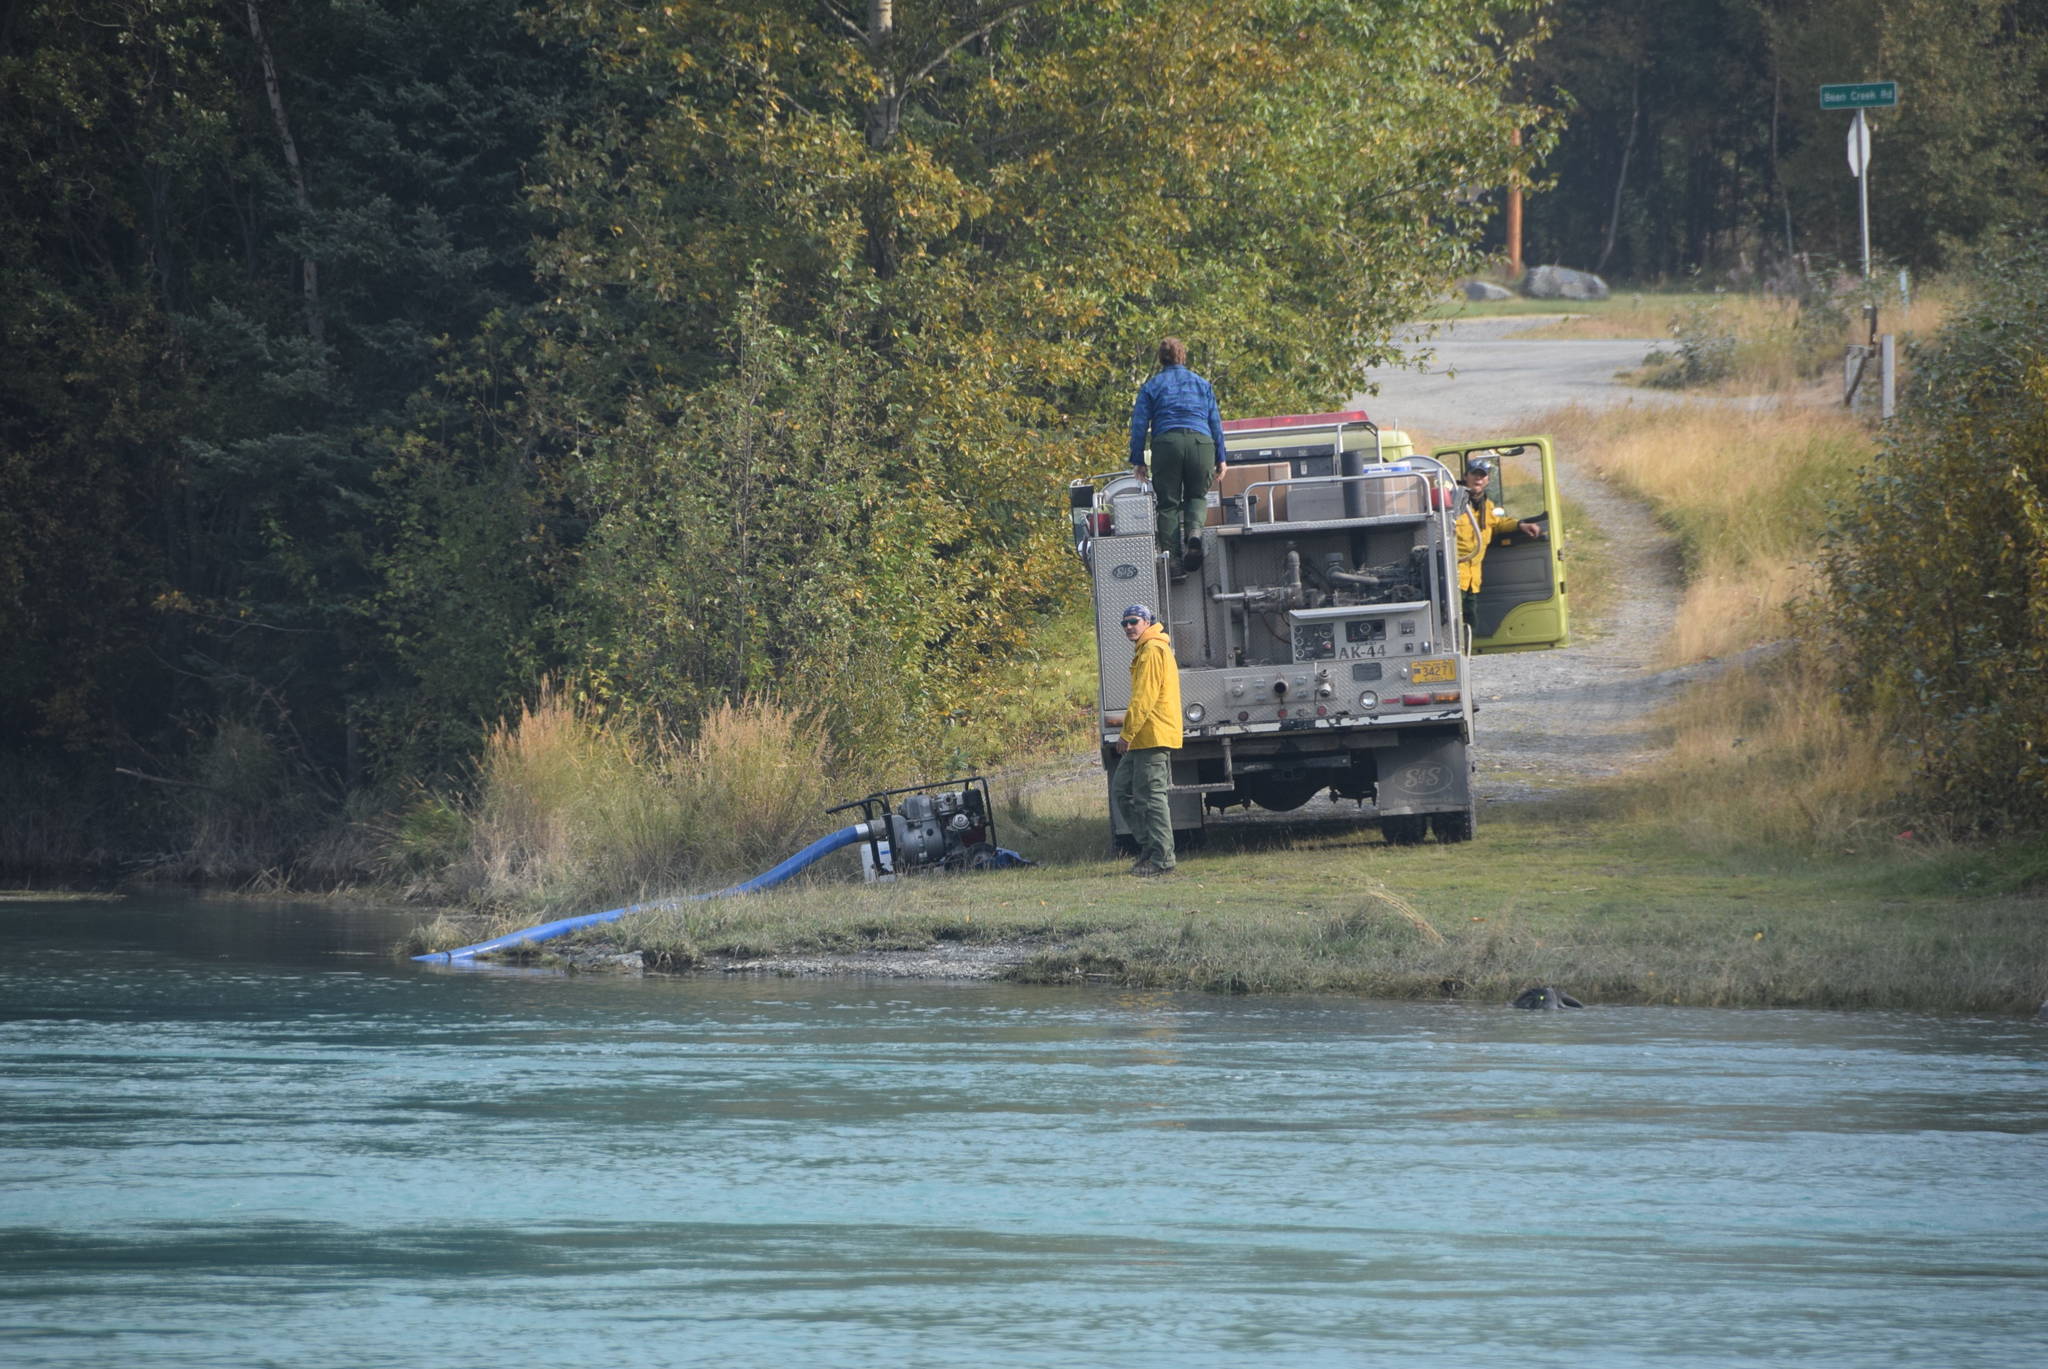 Firefighters stationed in Cooper Landing, Alaska refill a water tanker on the banks of the Kenai River on Aug. 30, 2019. (Photo by Brian Mazurek/Peninsula Clarion)